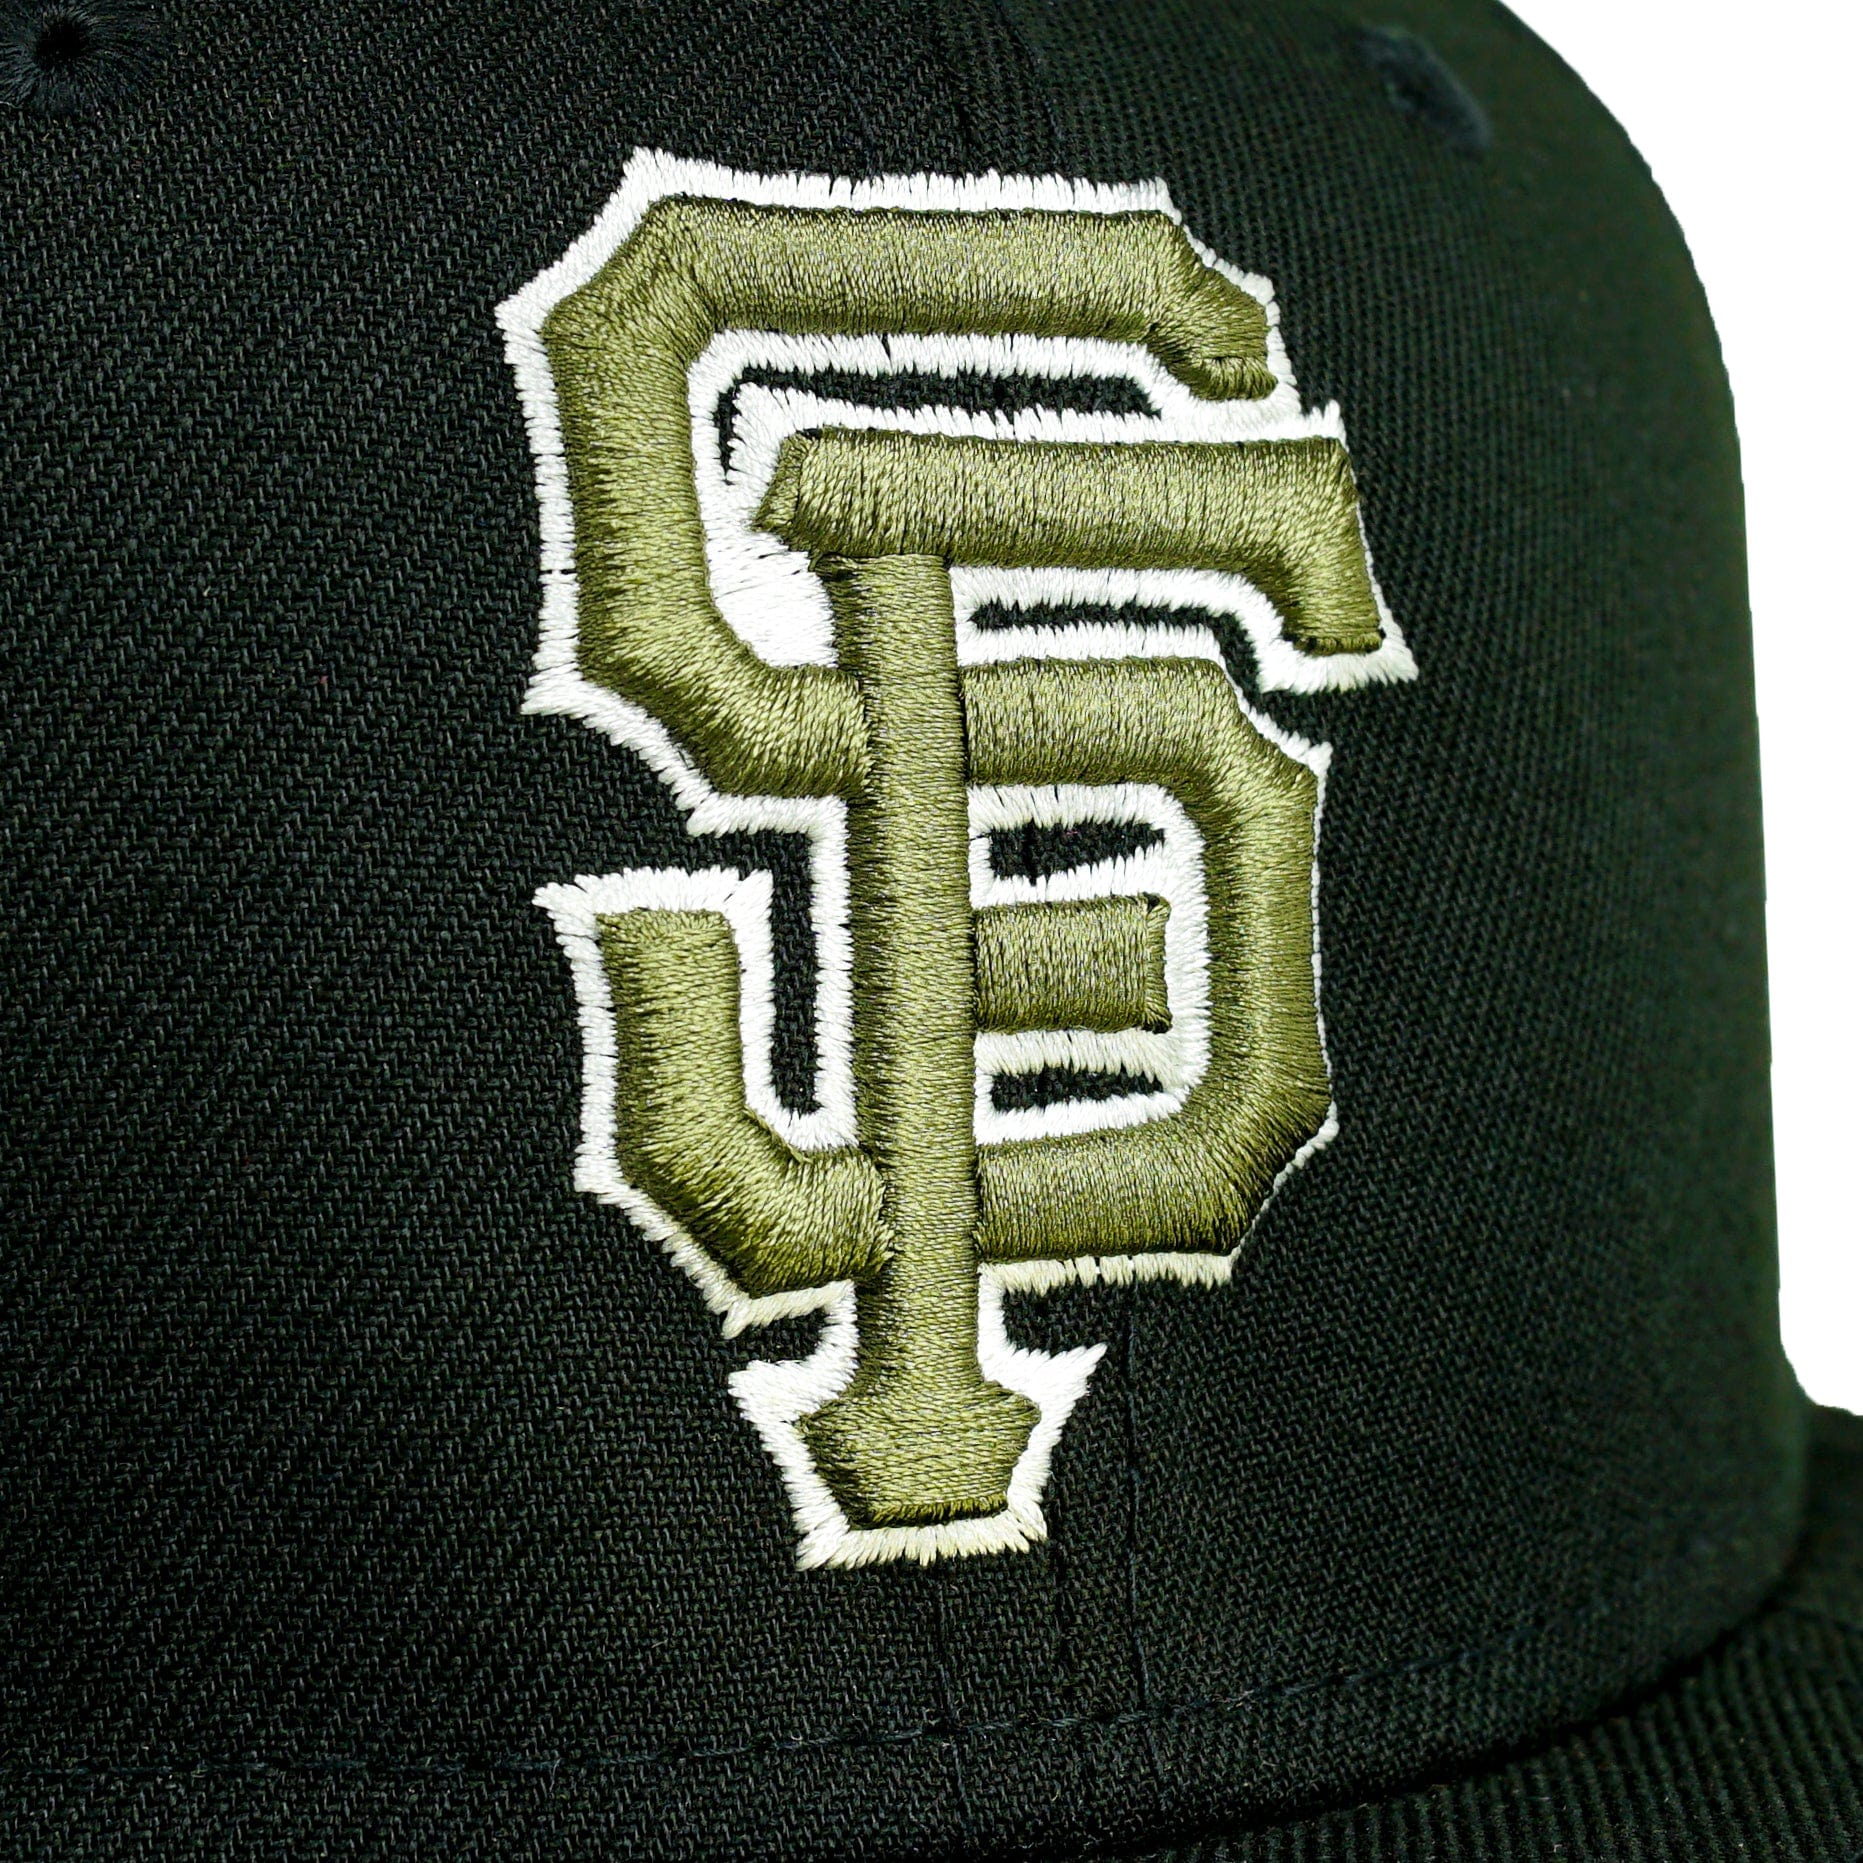 San Francisco Giants 25th Anniversary Botanical 59Fifty Fitted Hat in black